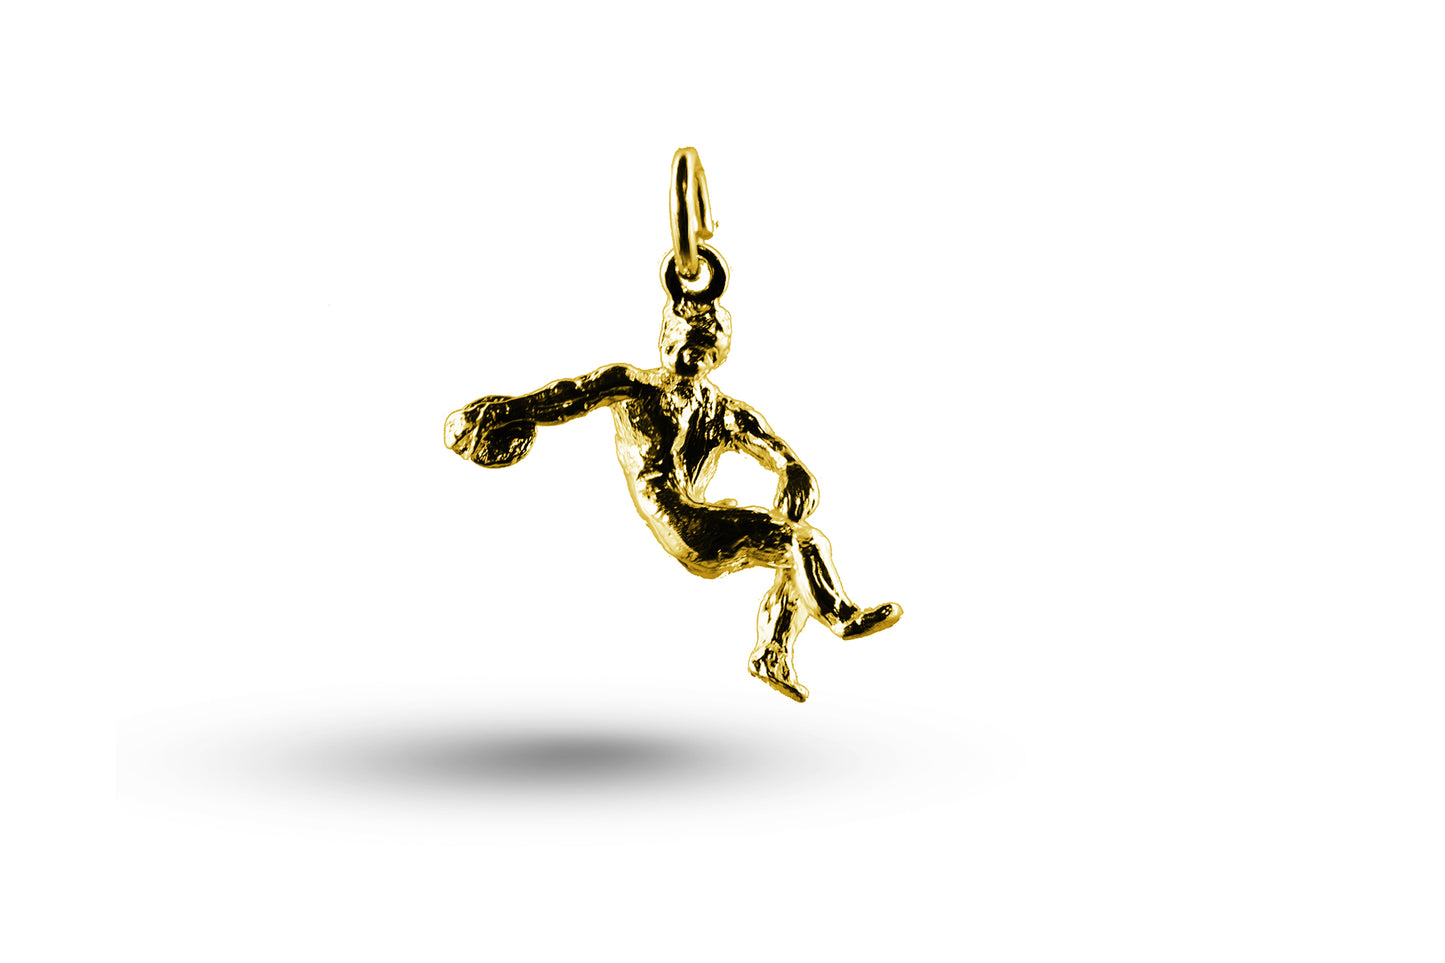 Yellow gold Discus charm.